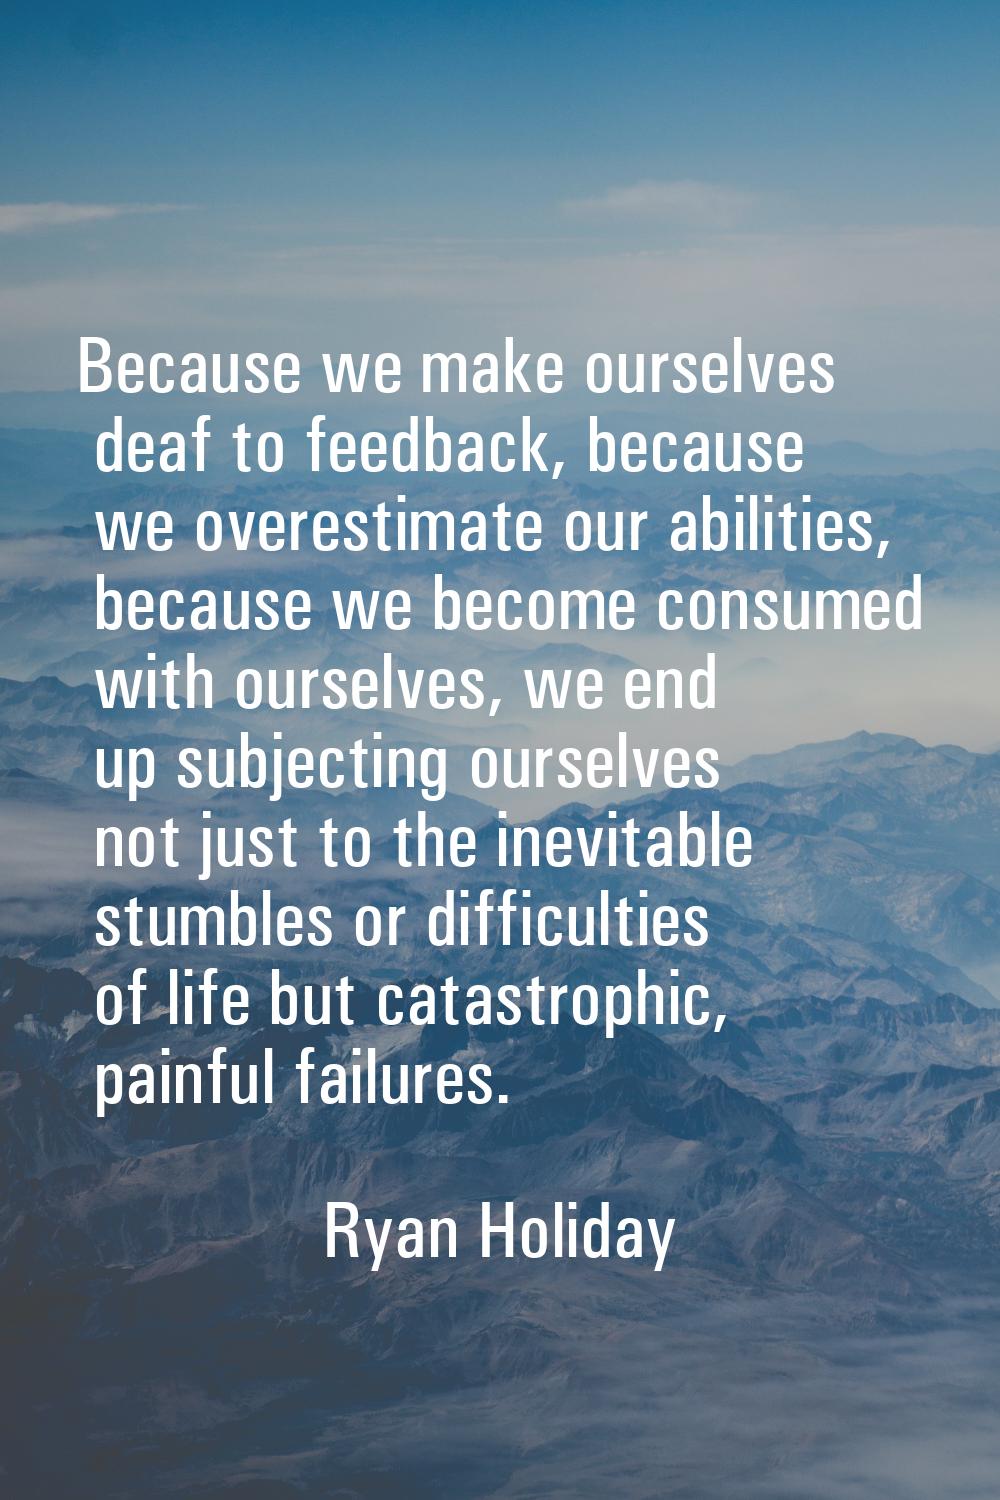 Because we make ourselves deaf to feedback, because we overestimate our abilities, because we becom